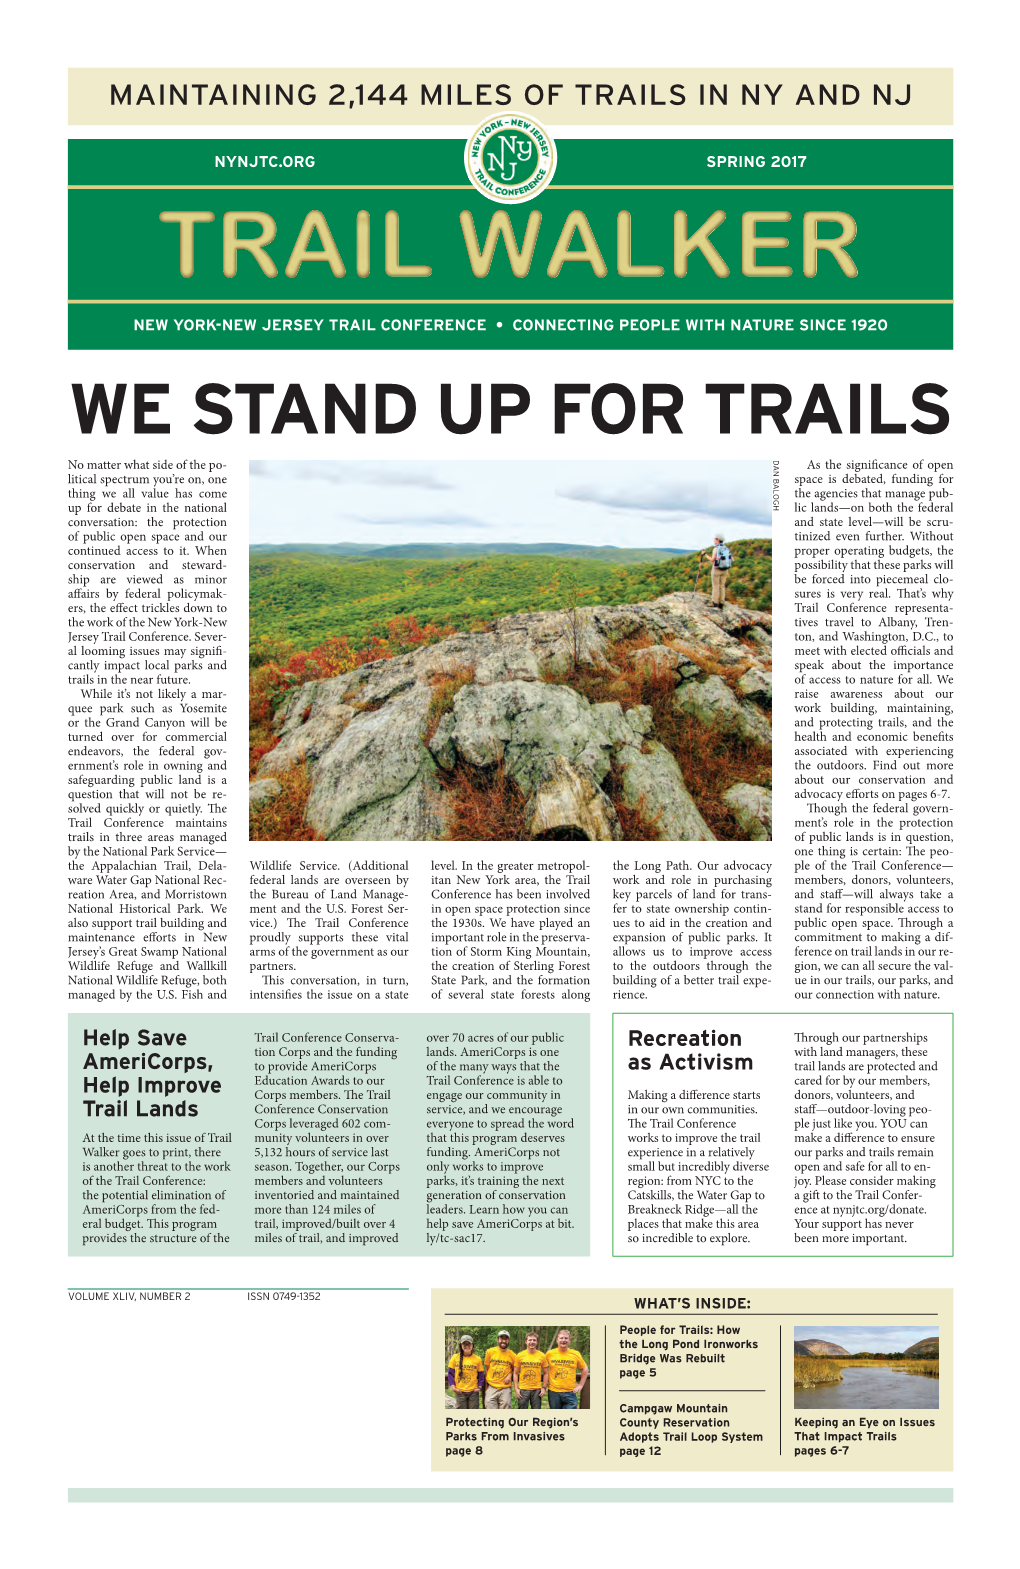 We Stand up for Trails